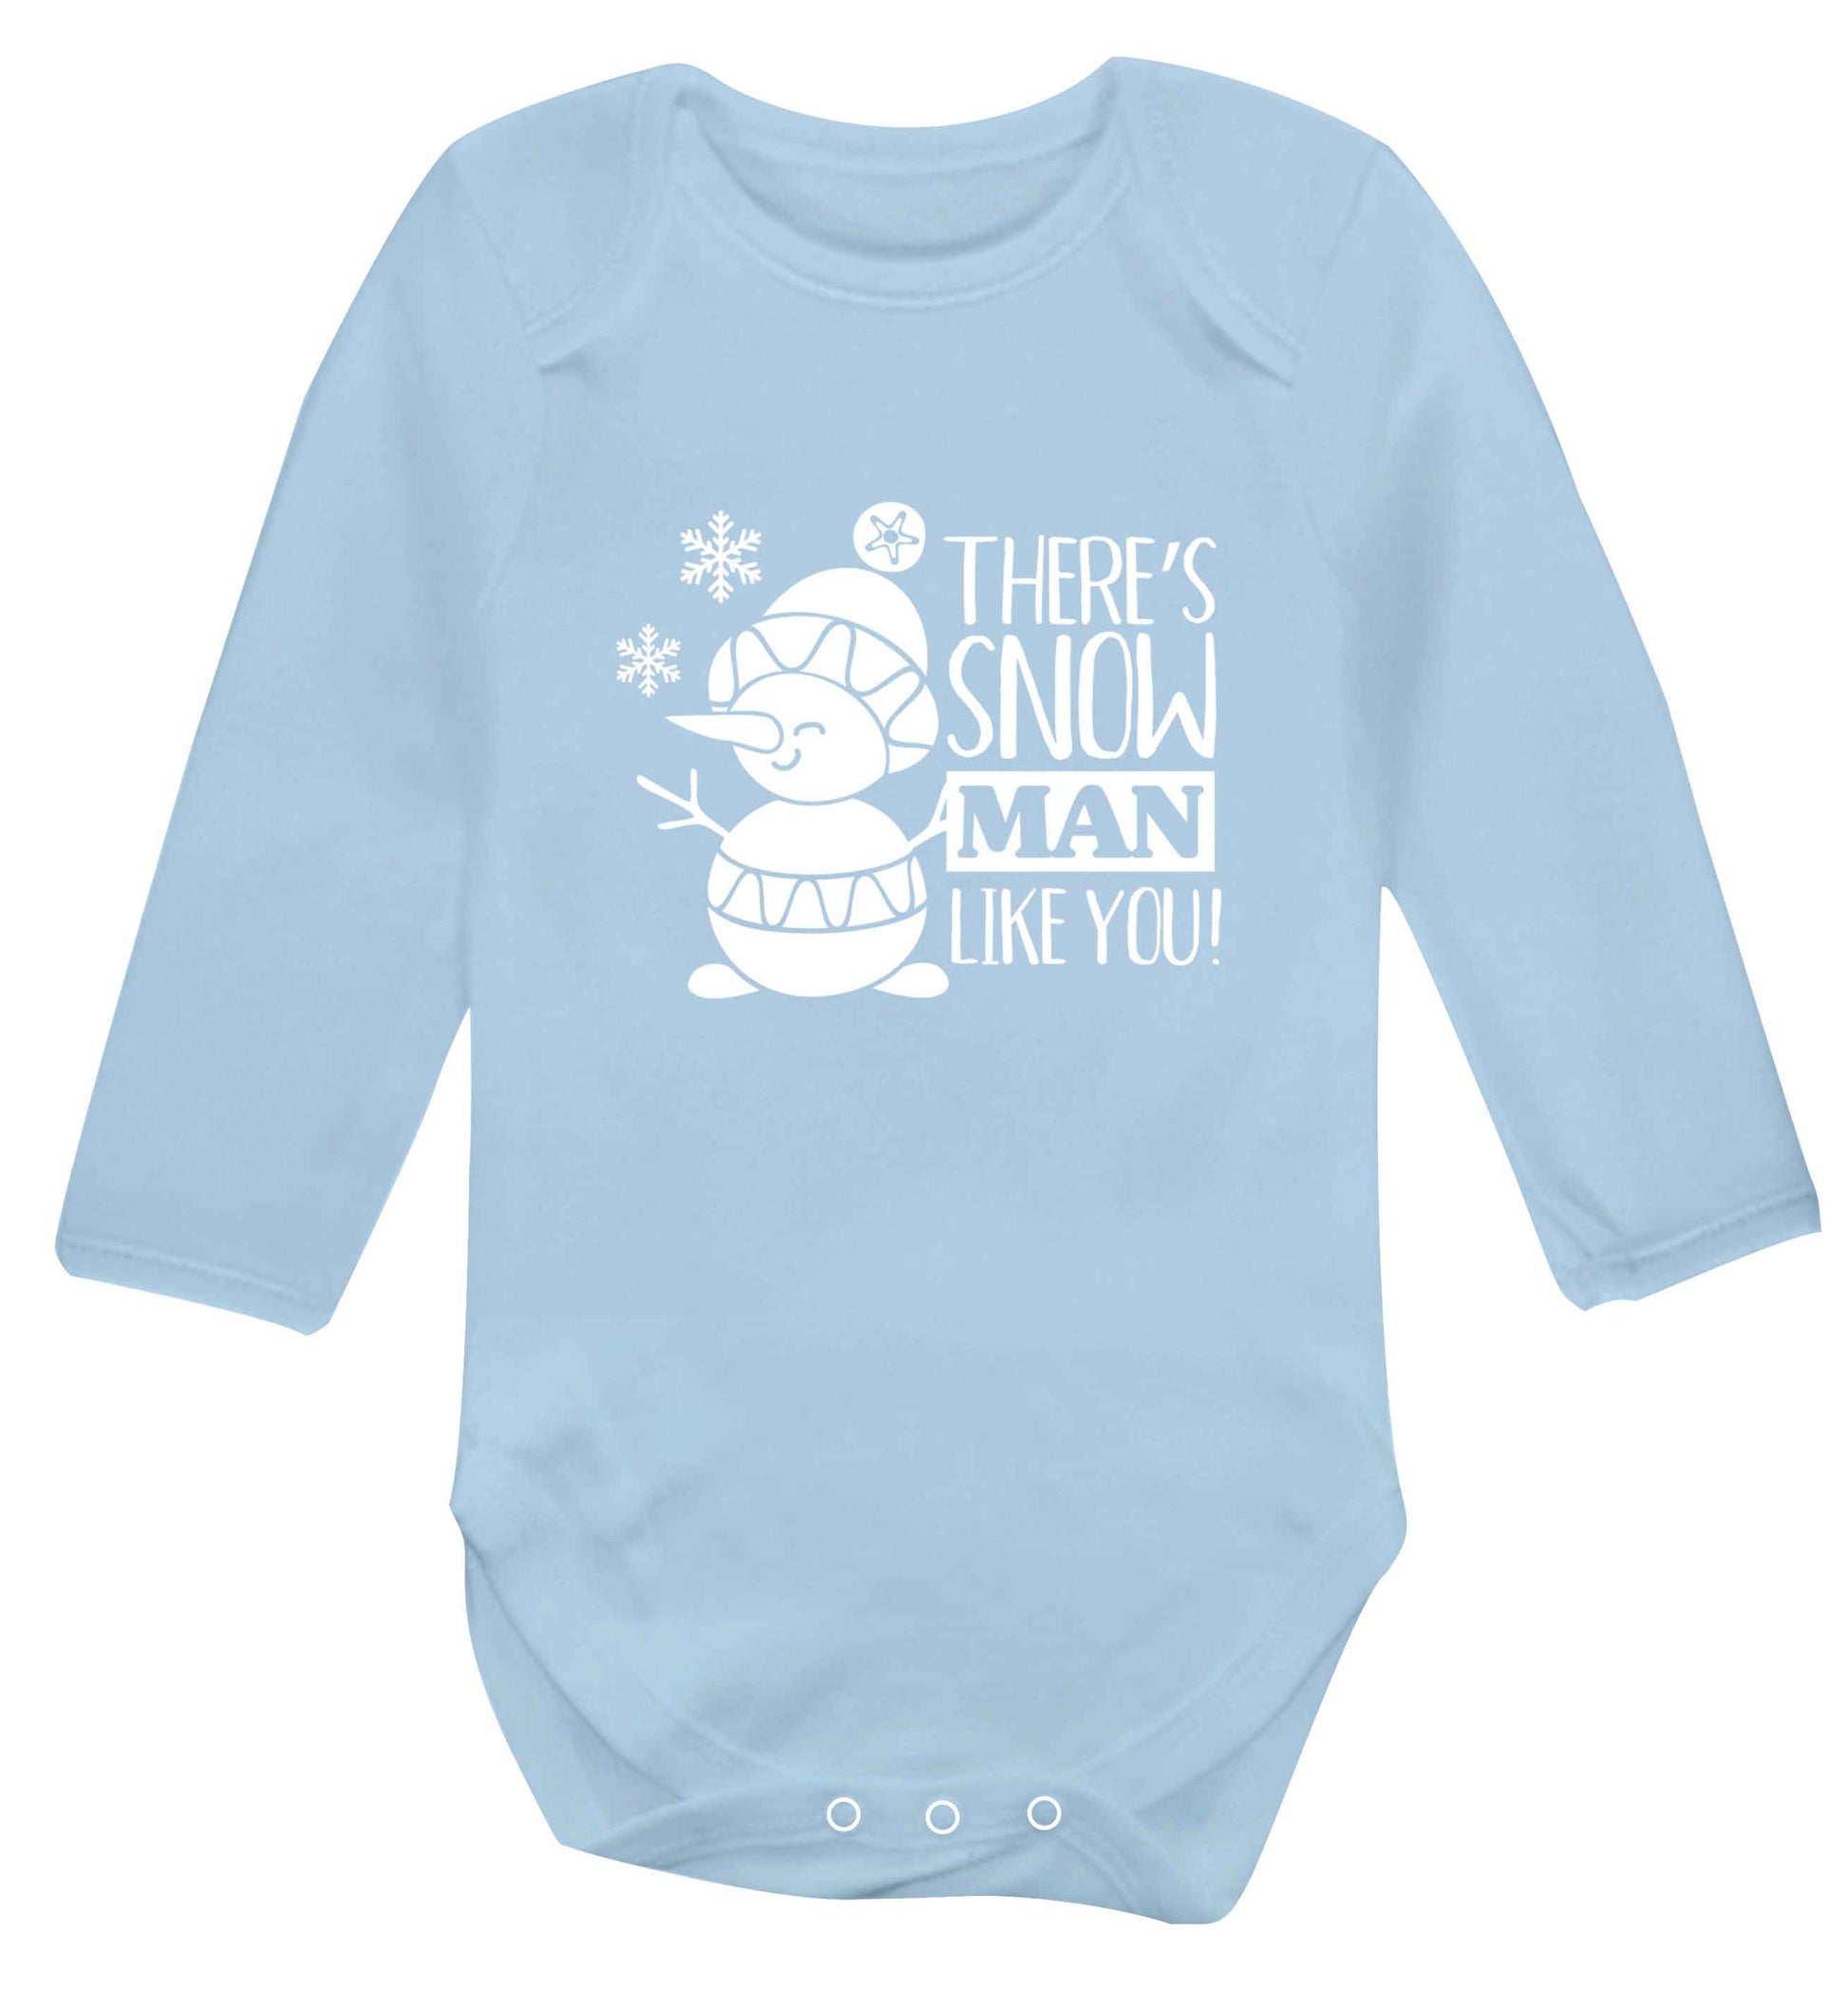 There's snow man like you baby vest long sleeved pale blue 6-12 months